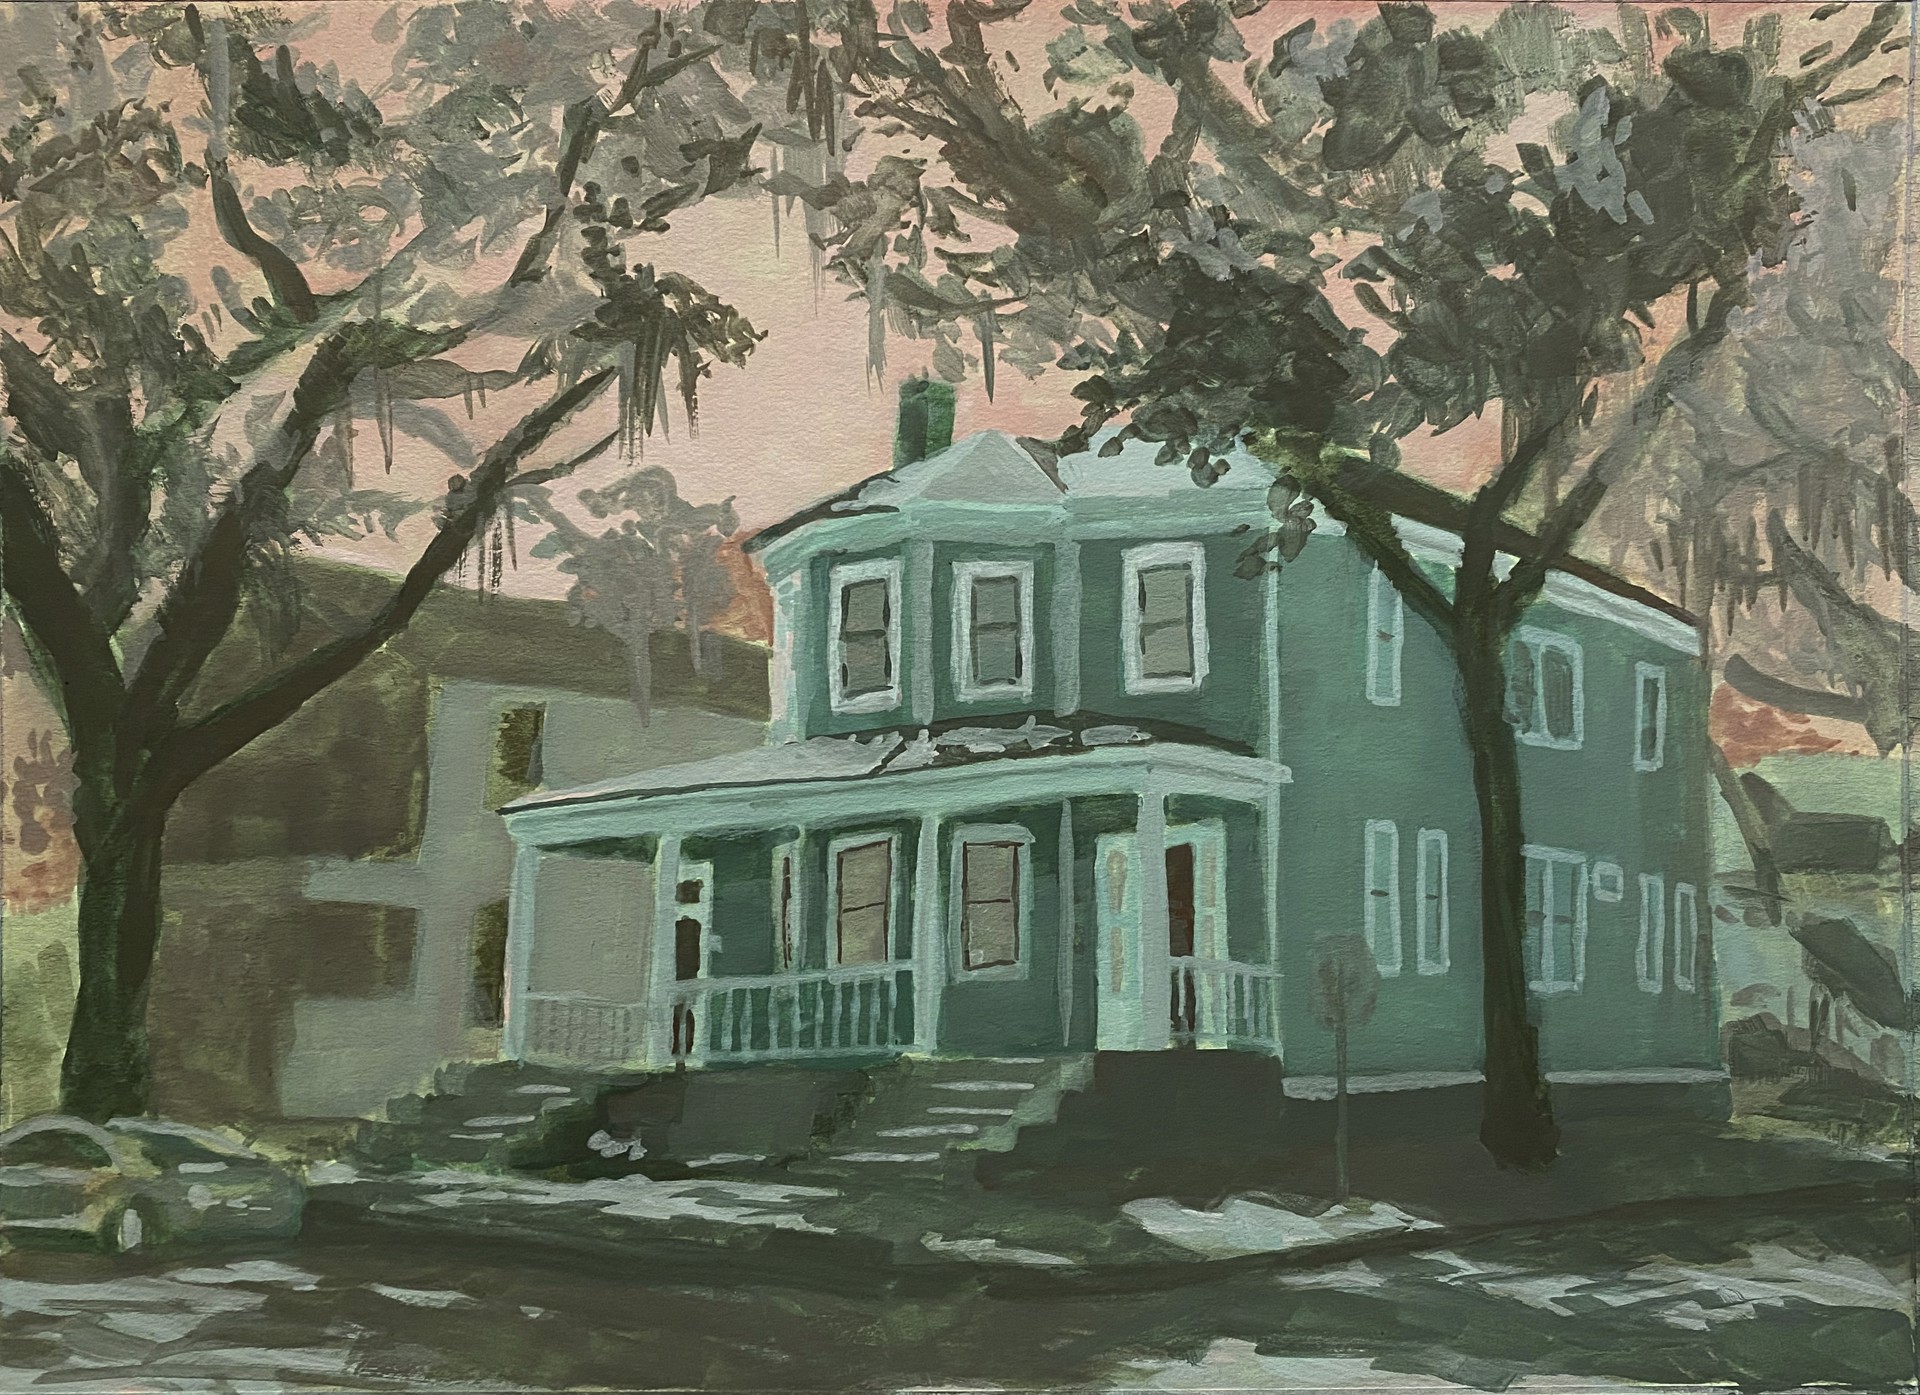 House in Savannah - Afternoon by Tonia Yiu